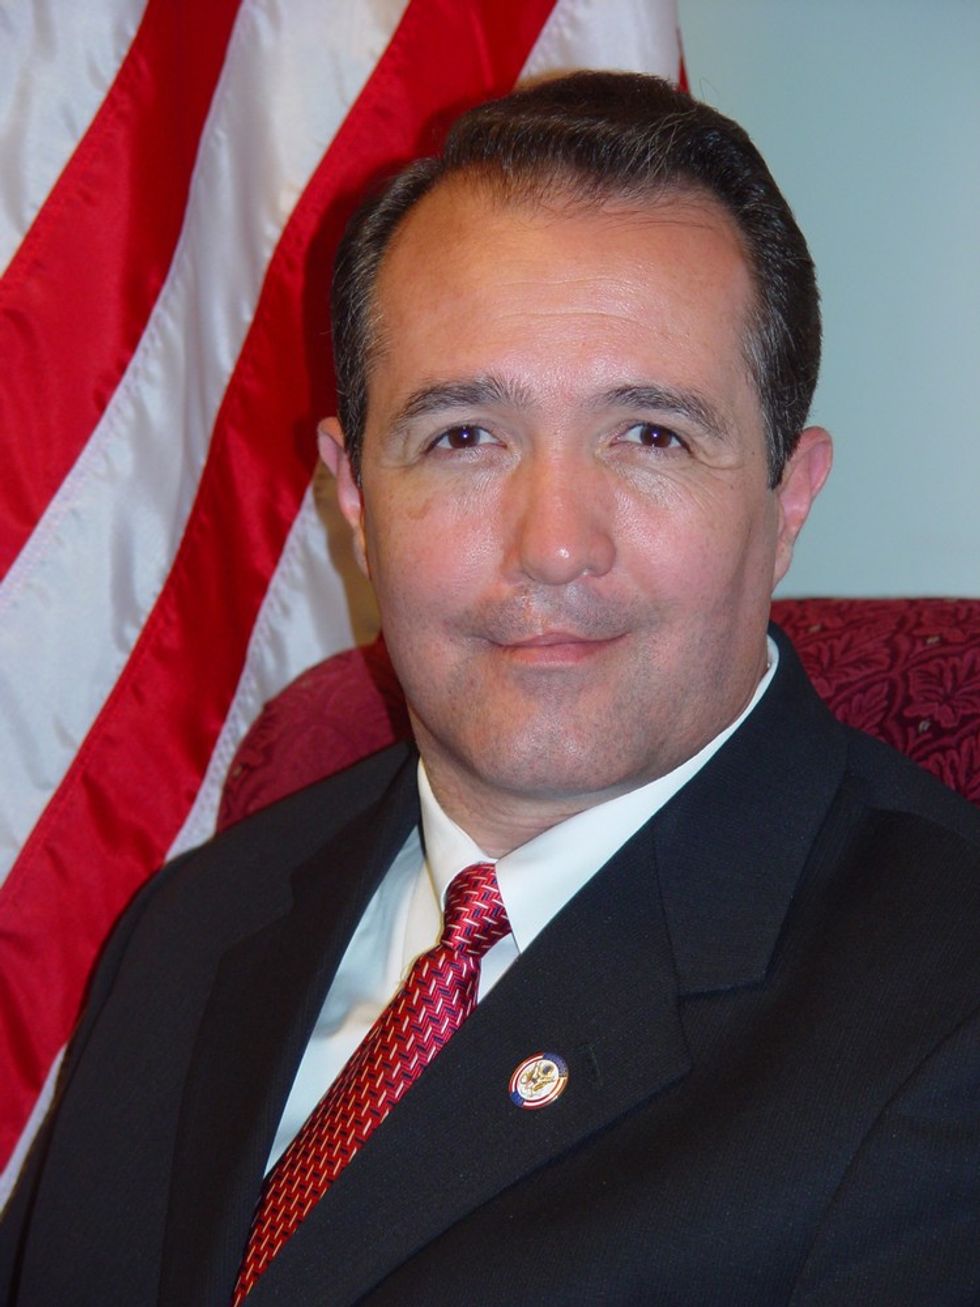 Rep. Trent Franks Only Sounds Like A Nazi Because He's '100 percent Unapologetically Pro-life'